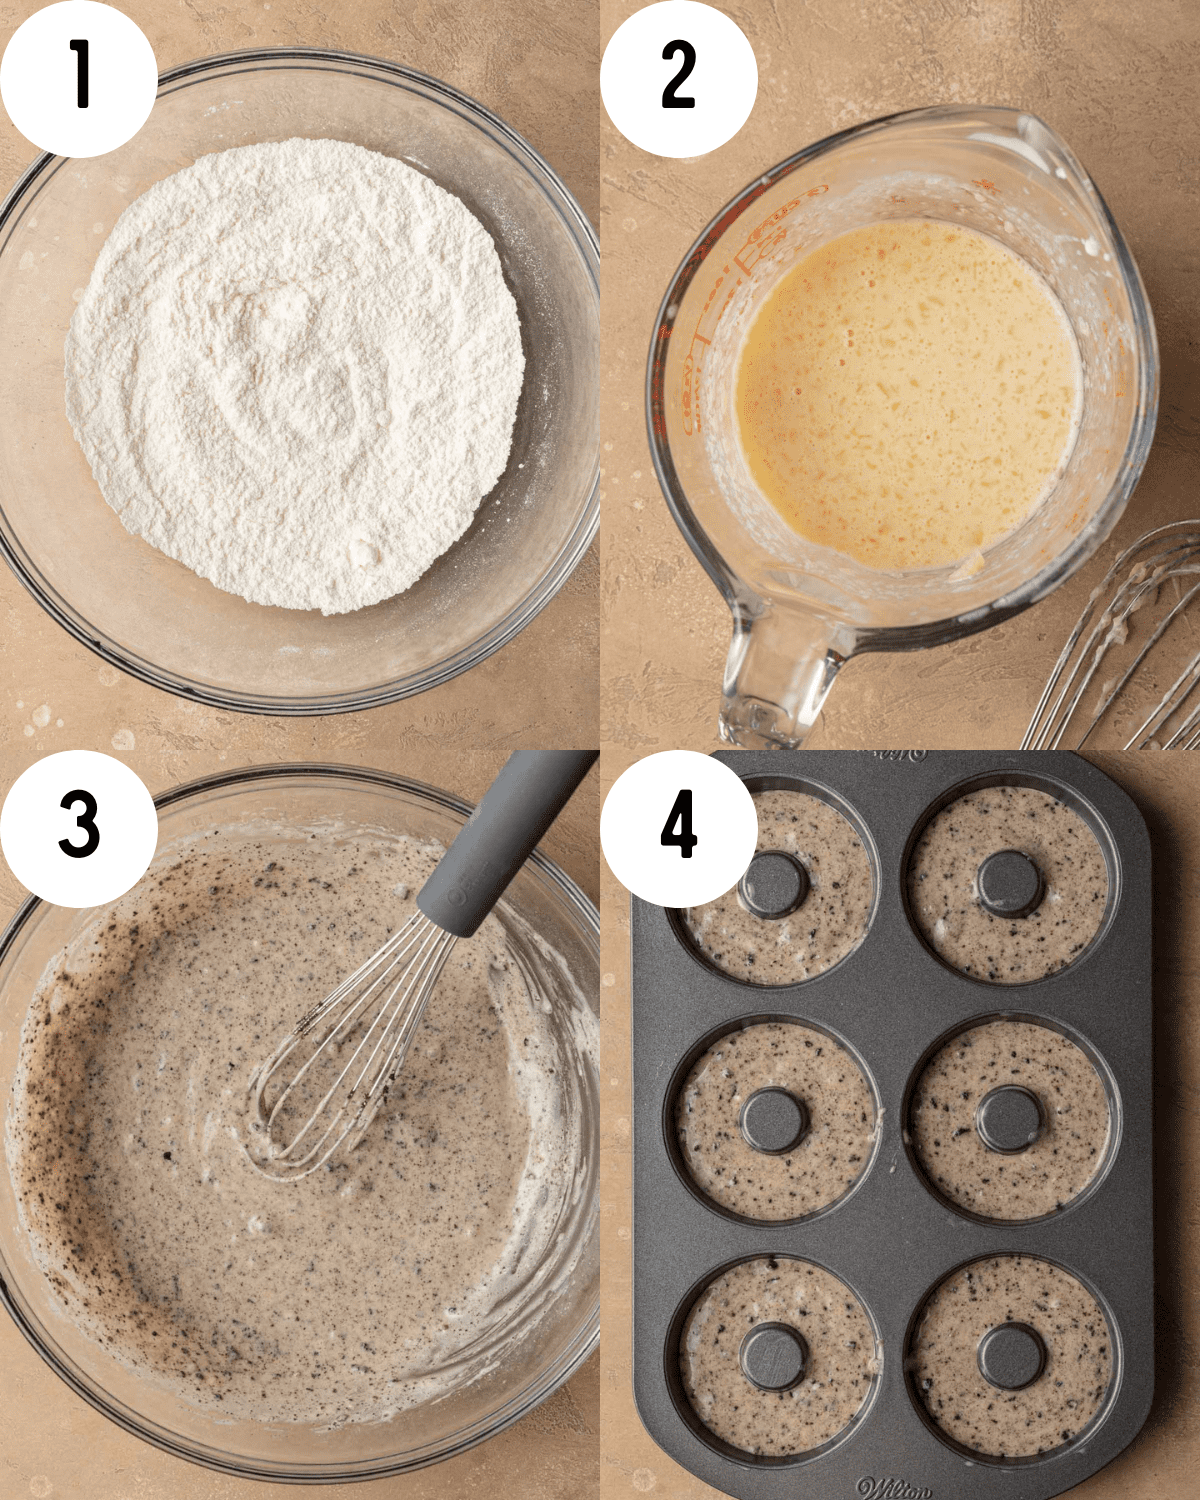 How to make oreo donuts. 1. Dry ingredients in glass mixing bowl. 2. wet ingredients in glass measuring bowl. 3. Dry and wet ingredients combined in glass mixing bowl. 4. Donut batter poured into donut baking pan, ready to be placed in oven.